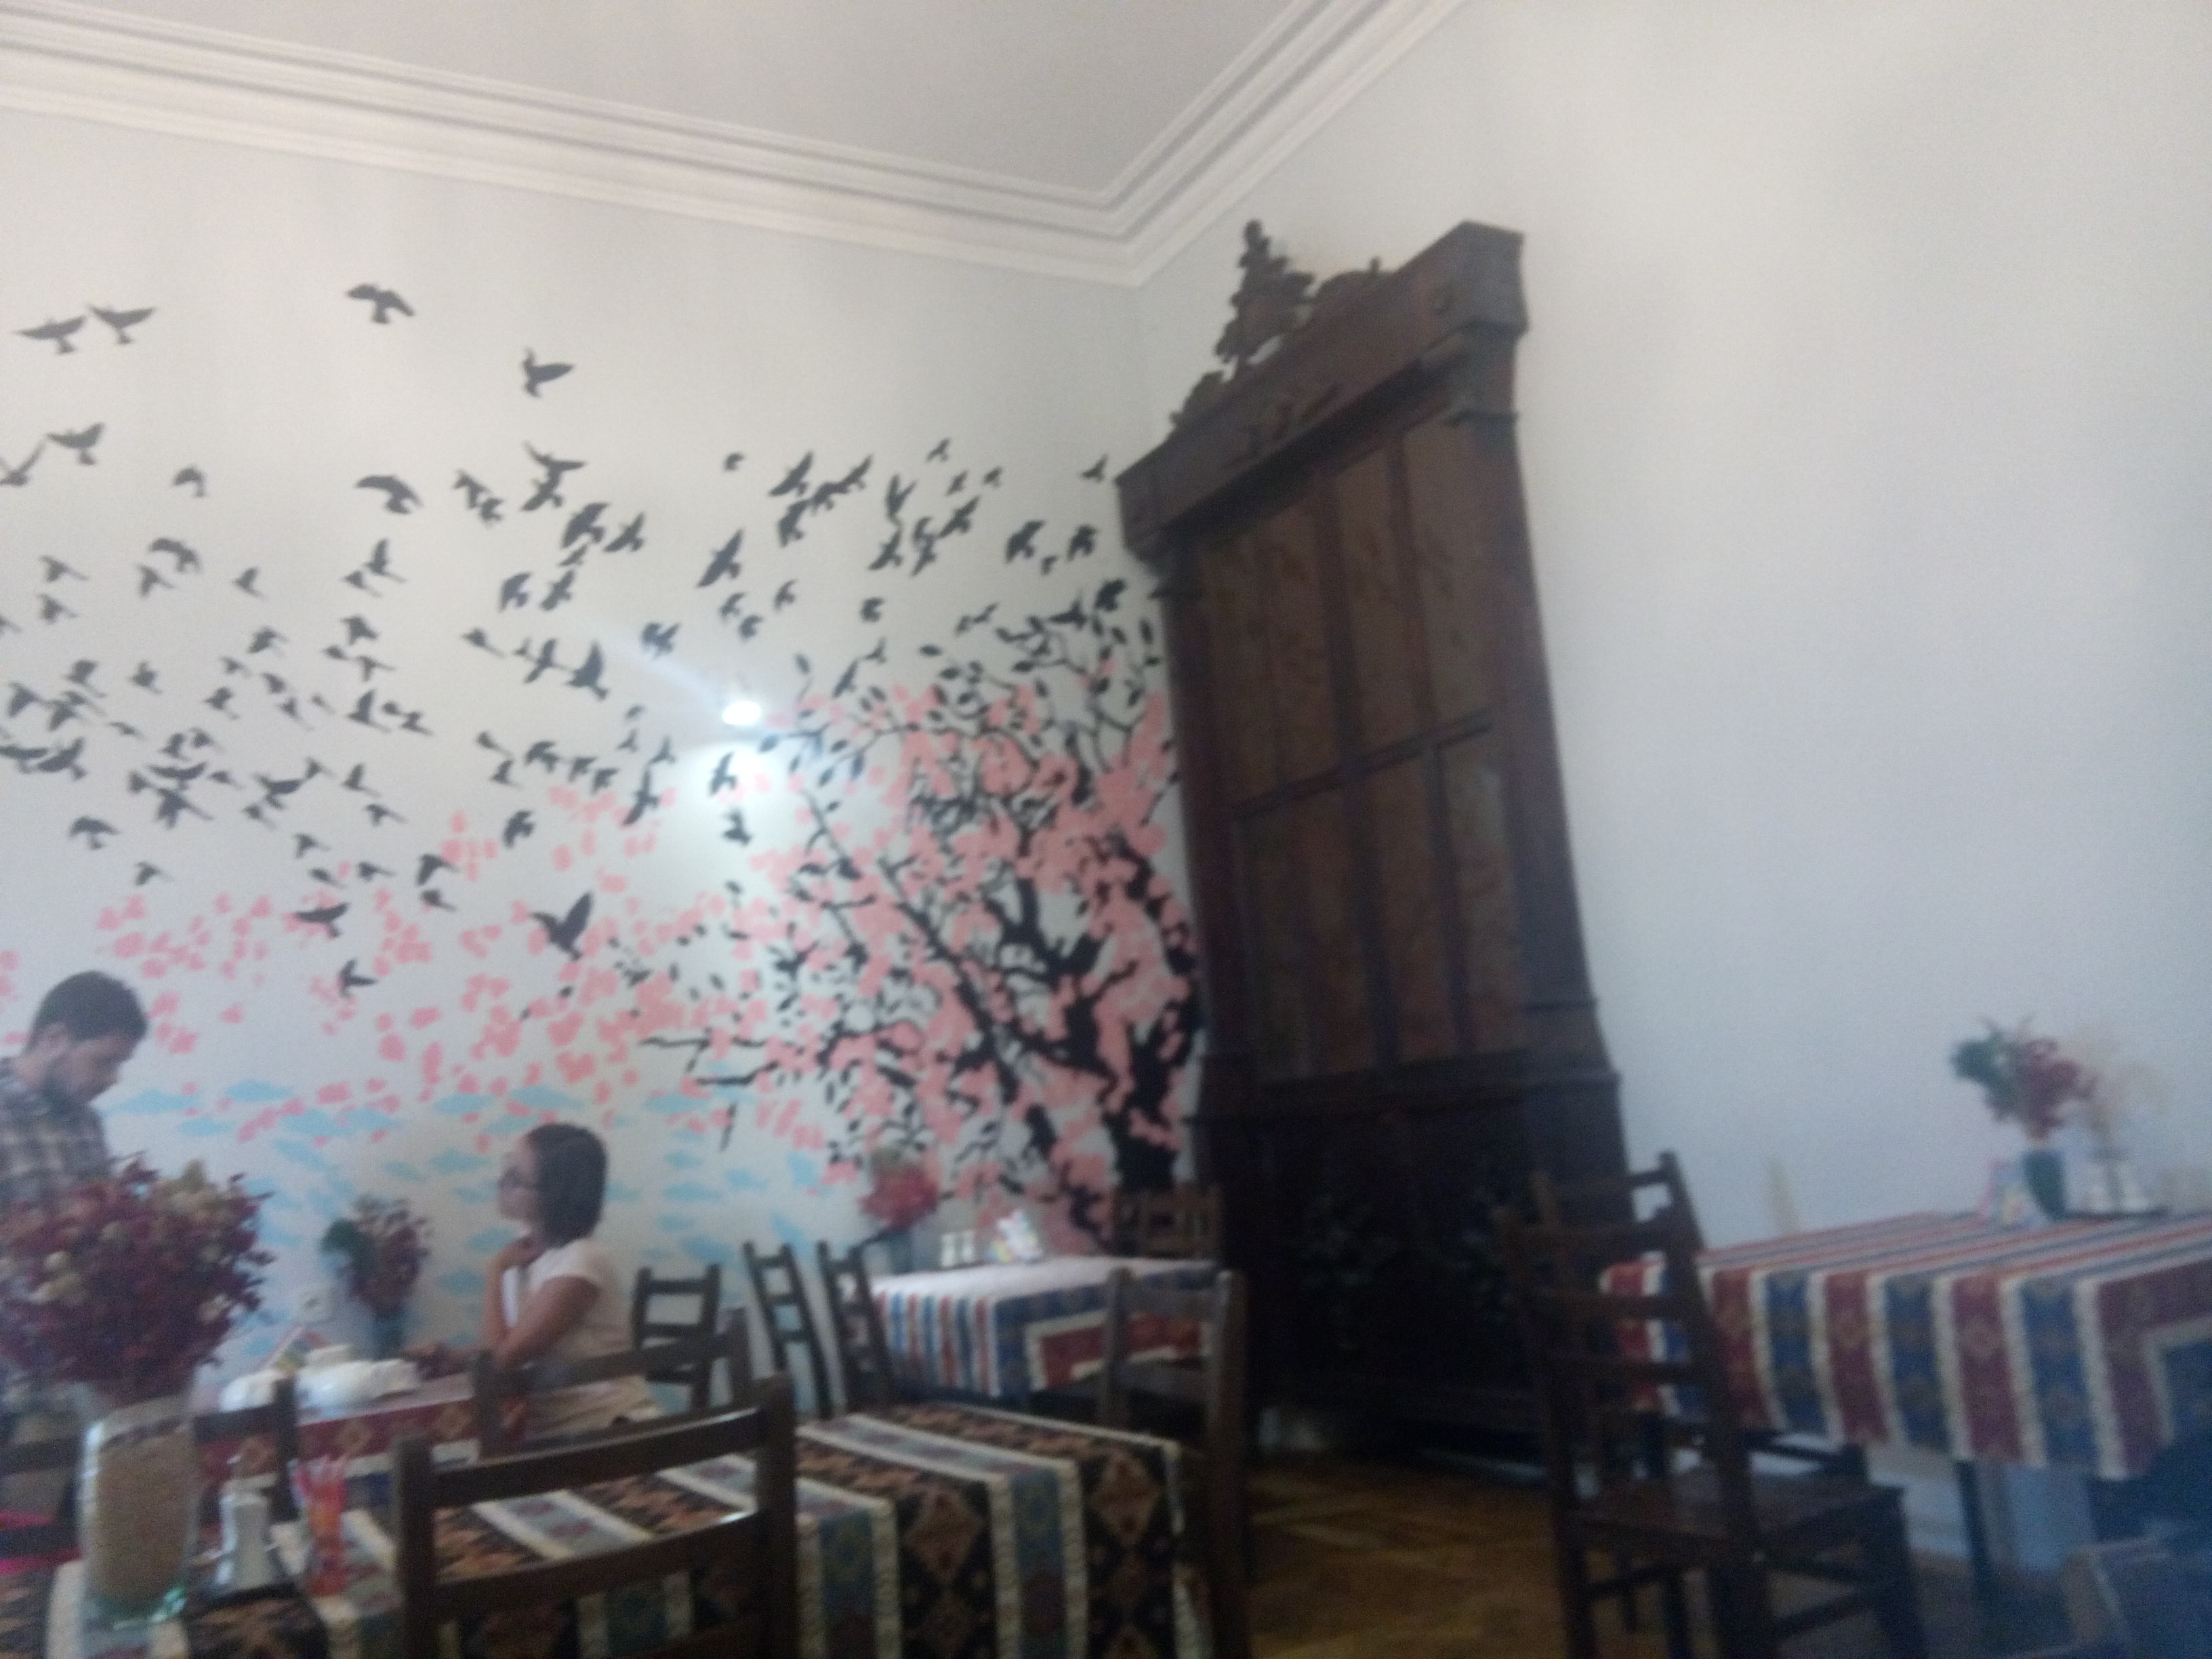 Inside a cafe with several tables, an ornate wooden cabinate against the wall, and a mural of birds flying from a tree